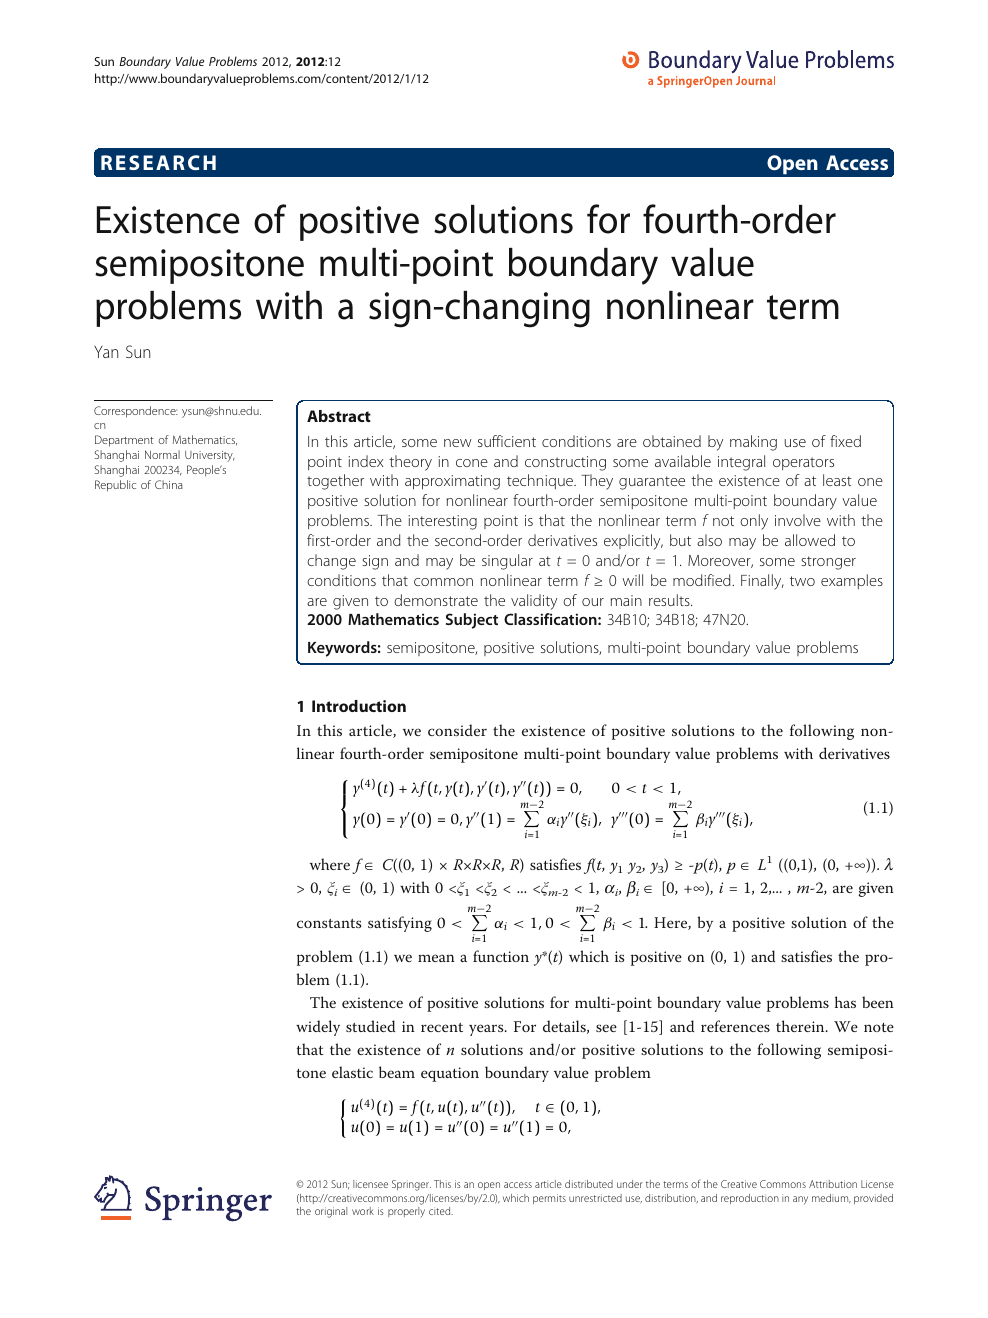 Existence Of Positive Solutions For Fourth Order Semipositone Multi Point Boundary Value Problems With A Sign Changing Nonlinear Term Topic Of Research Paper In Mathematics Download Scholarly Article Pdf And Read For Free On